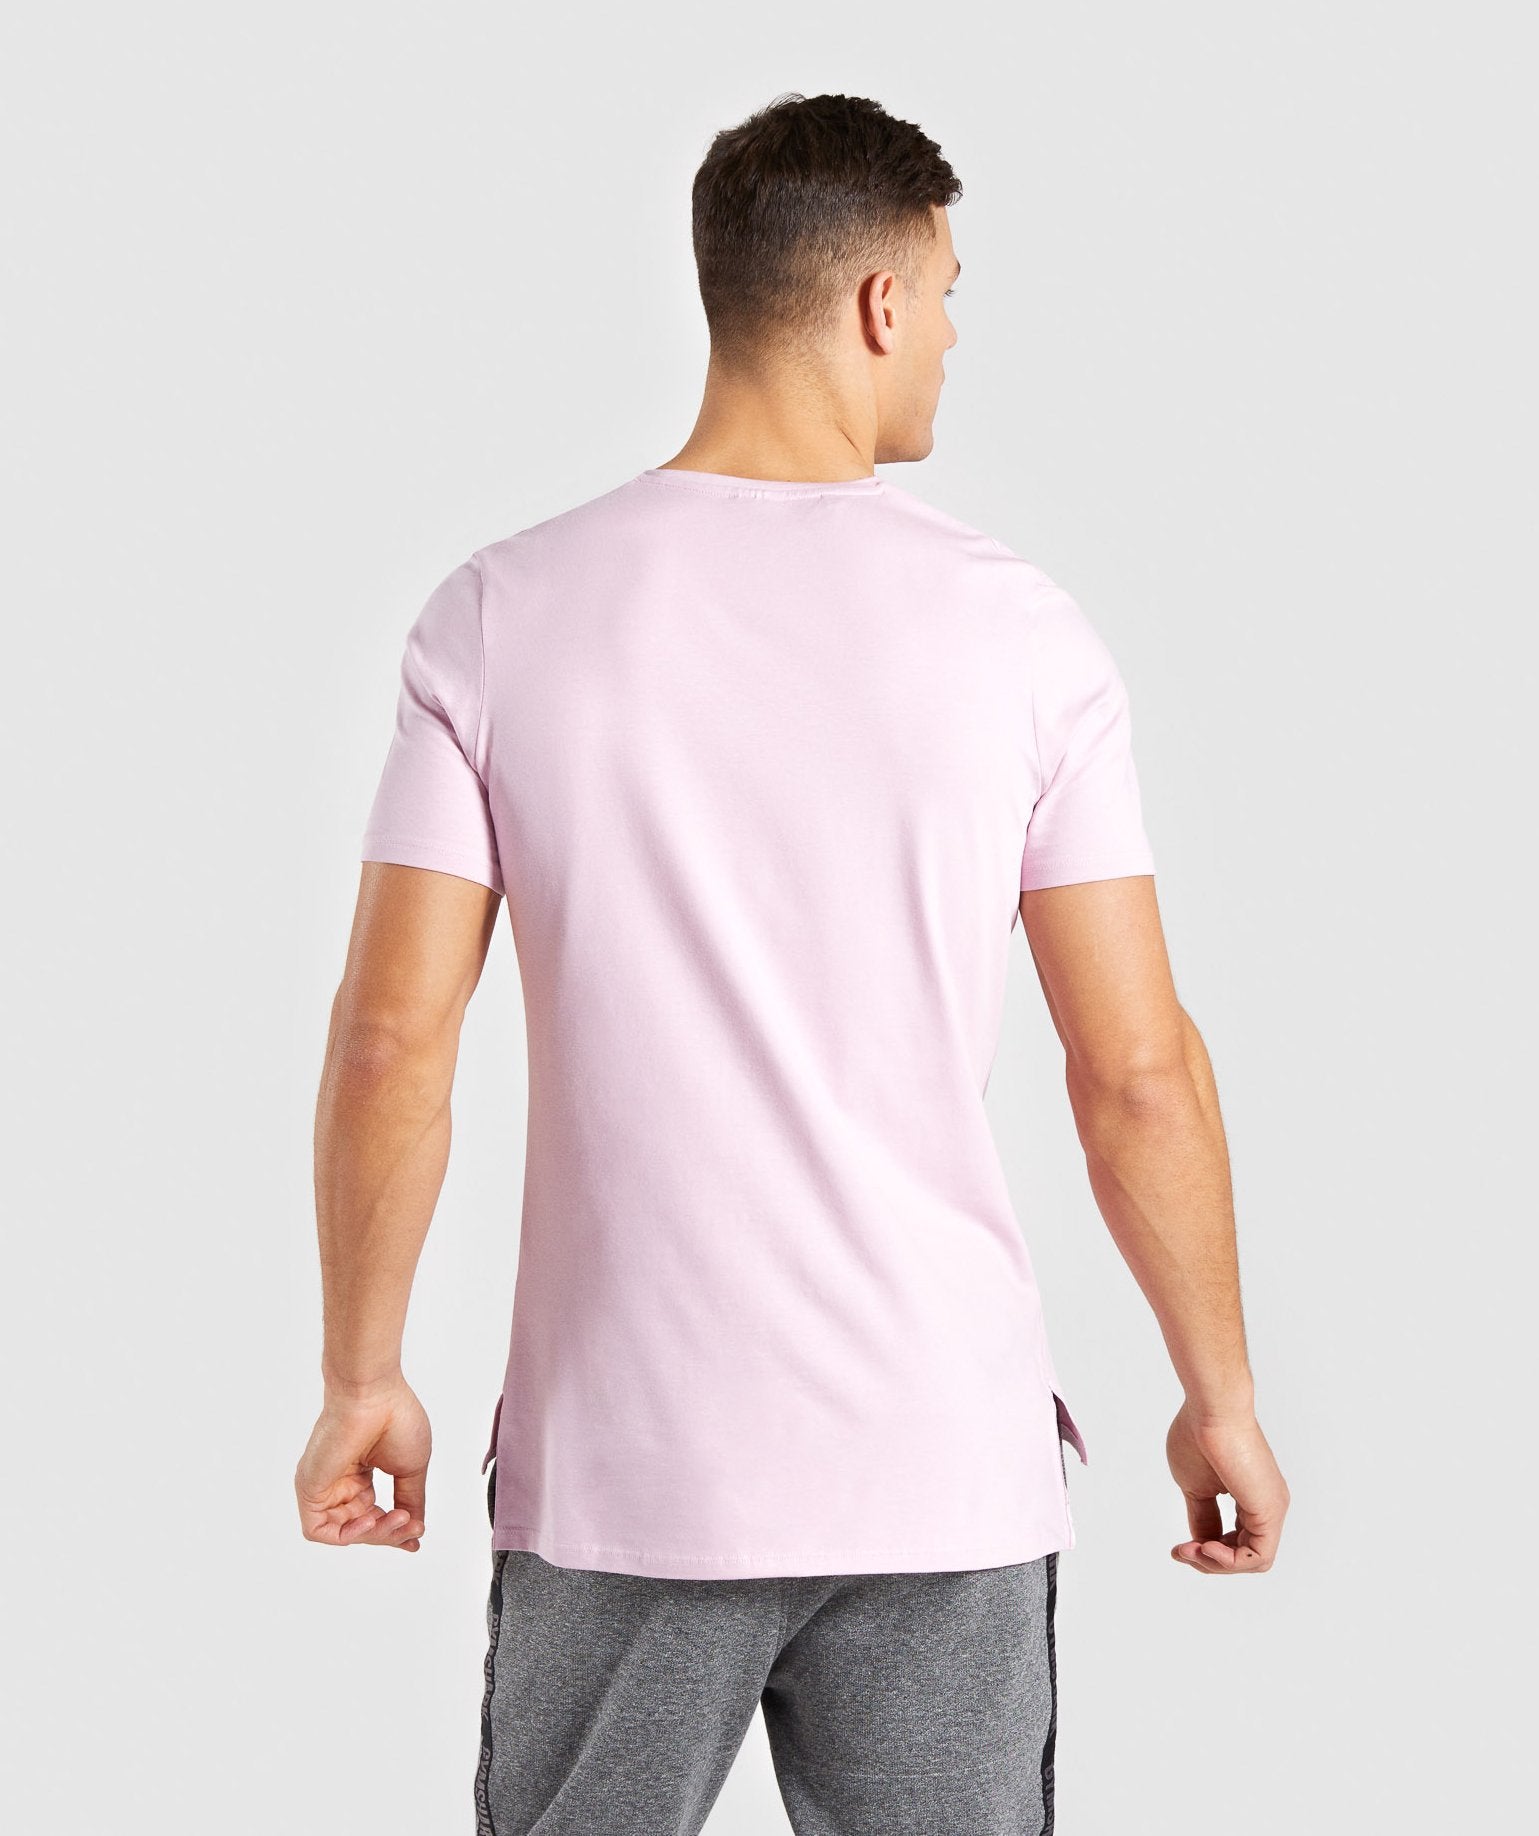 Central T-Shirt in Light Pink - view 2